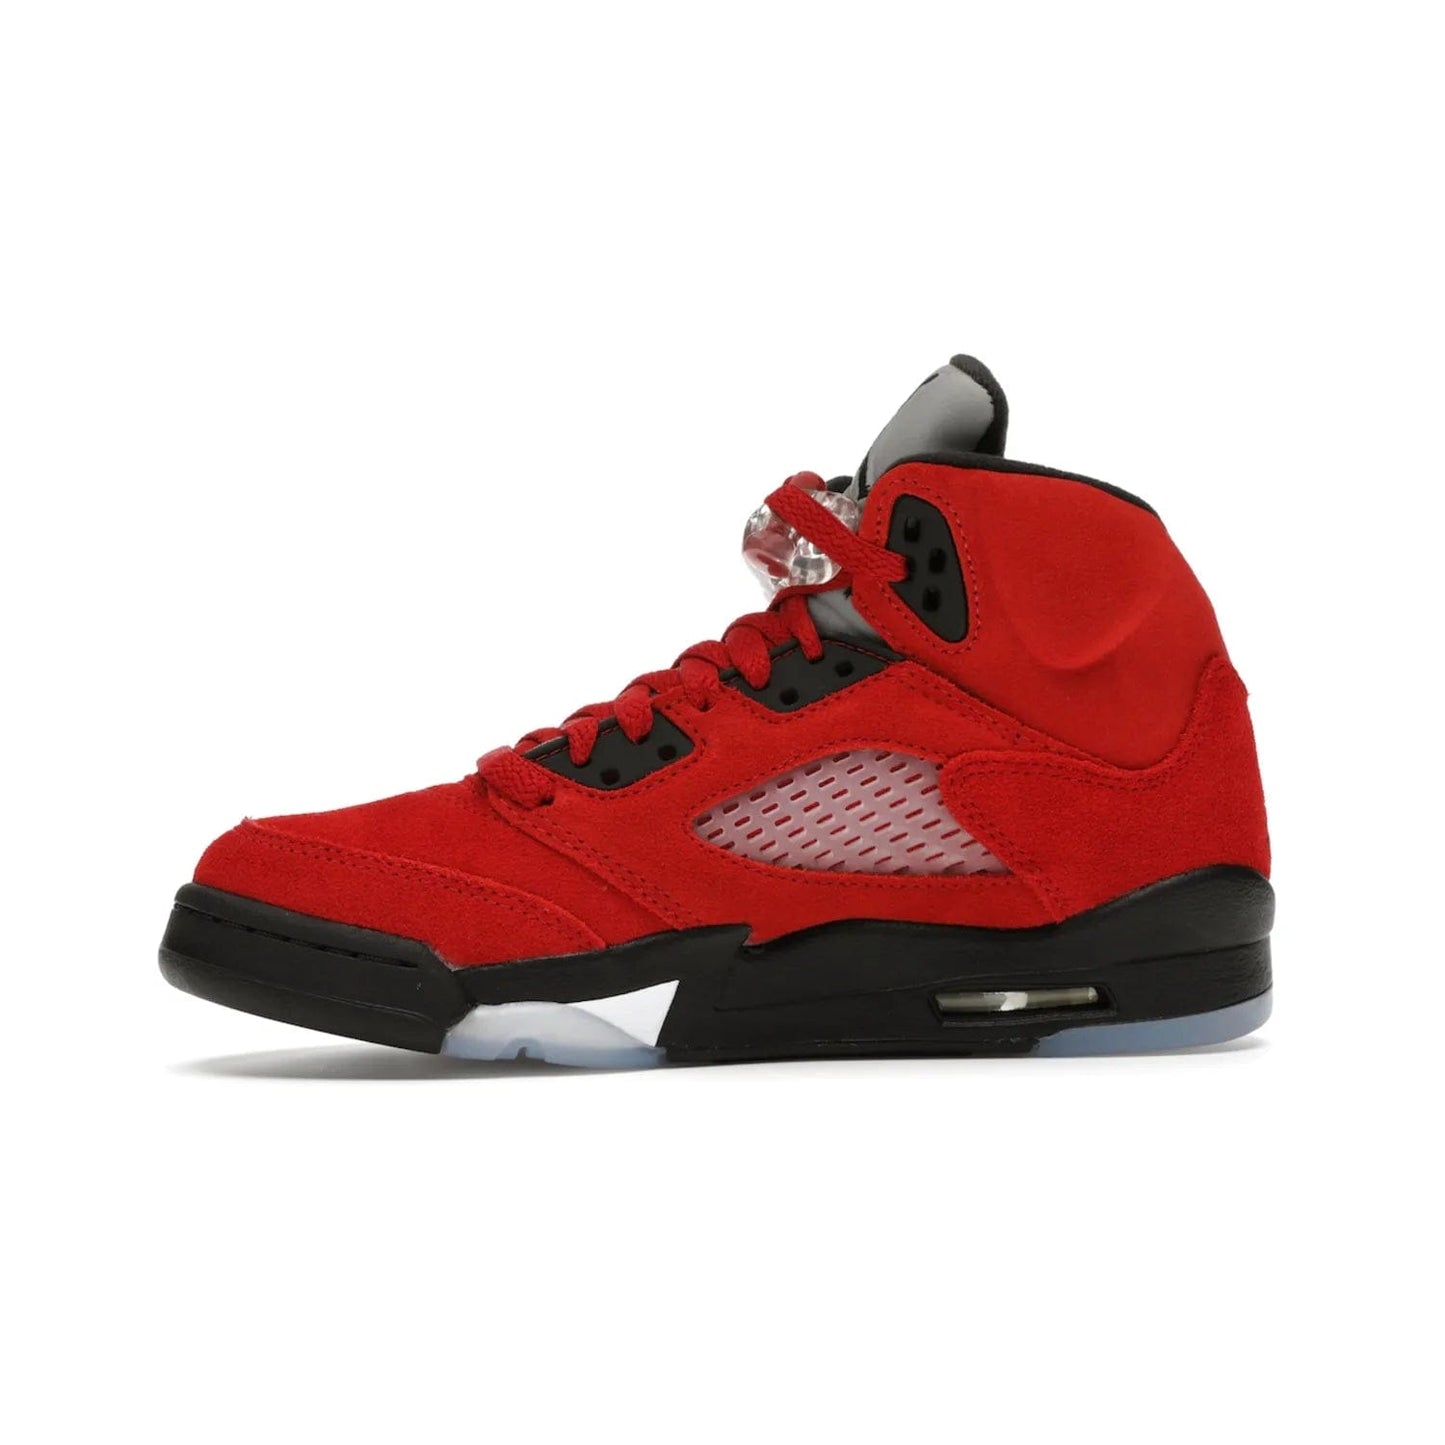 Jordan 5 Retro Raging Bull Red (2021) (GS) - Image 18 - Only at www.BallersClubKickz.com - Jordan 5 Retro Raging Bulls Red 2021 GS. Varsity Red suede upper with embroidered number 23, black leather detail, red laces, and midsole with air cushioning. Jumpman logos on tongue, heel, and outsole. On-trend streetwear and basketball style. Released April 10, 2021.